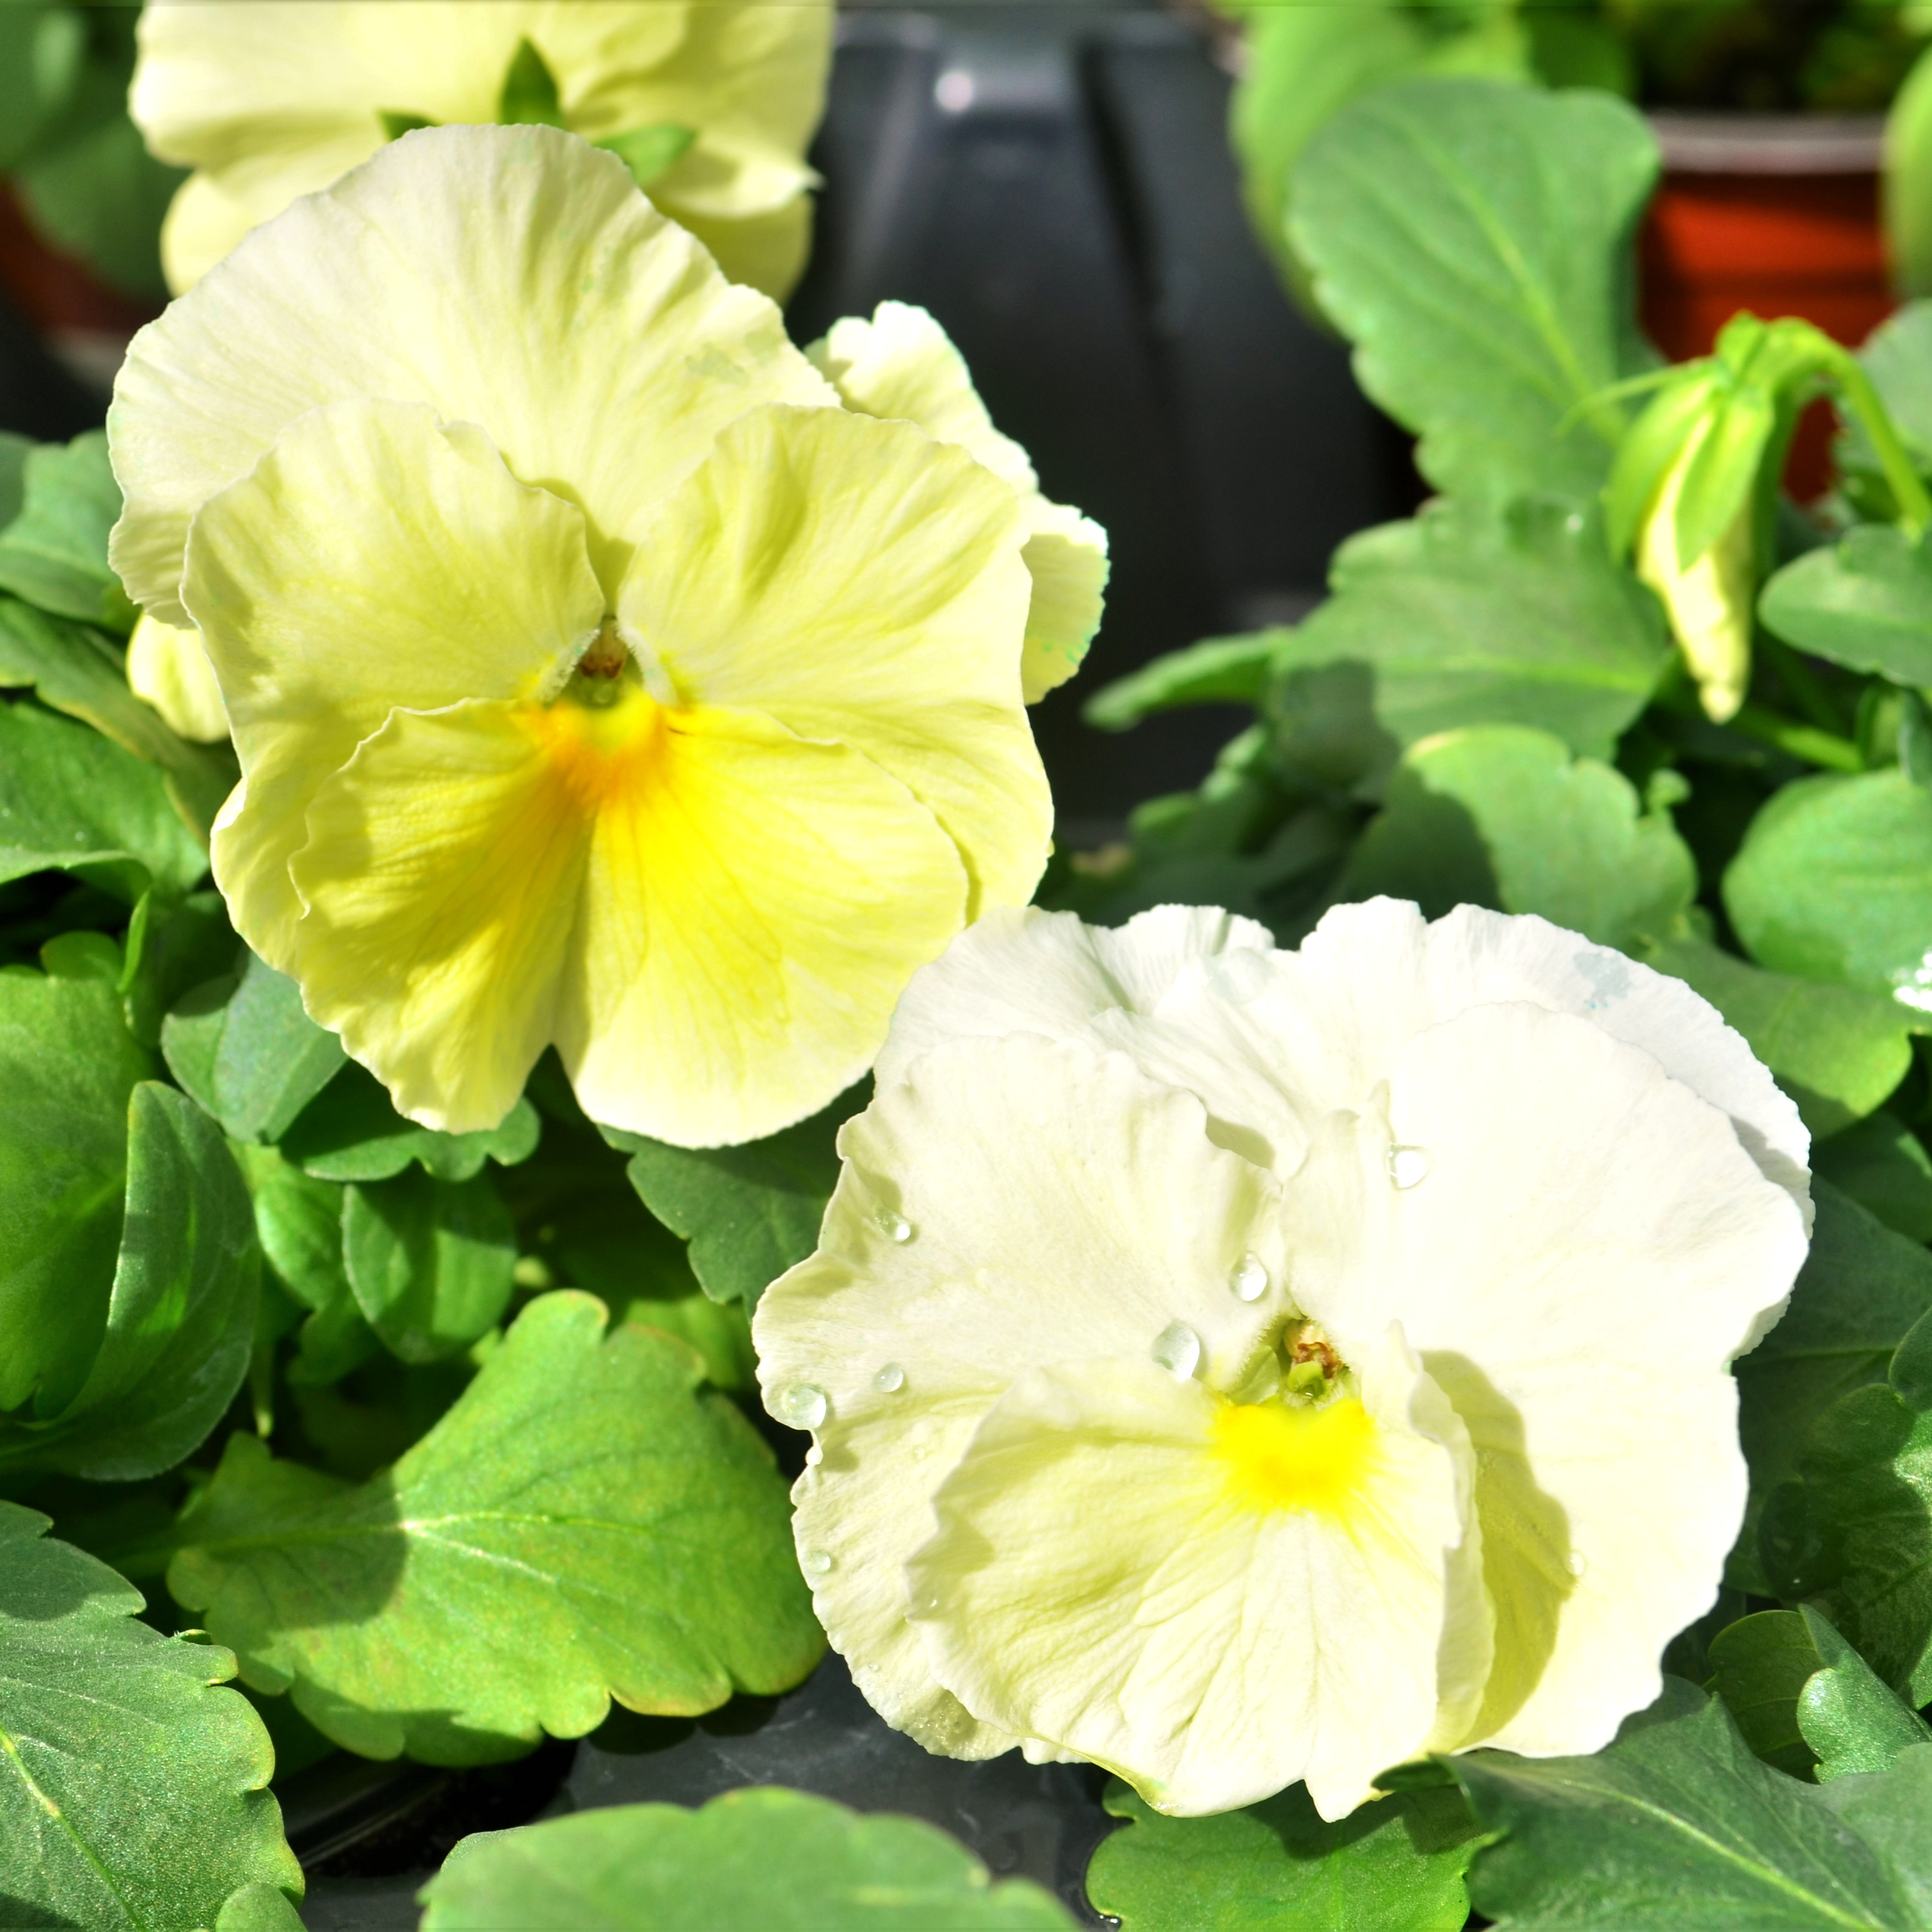 Viola wittrockiana Colossus 'Lemon Shades' - Pansy from Hillcrest Nursery